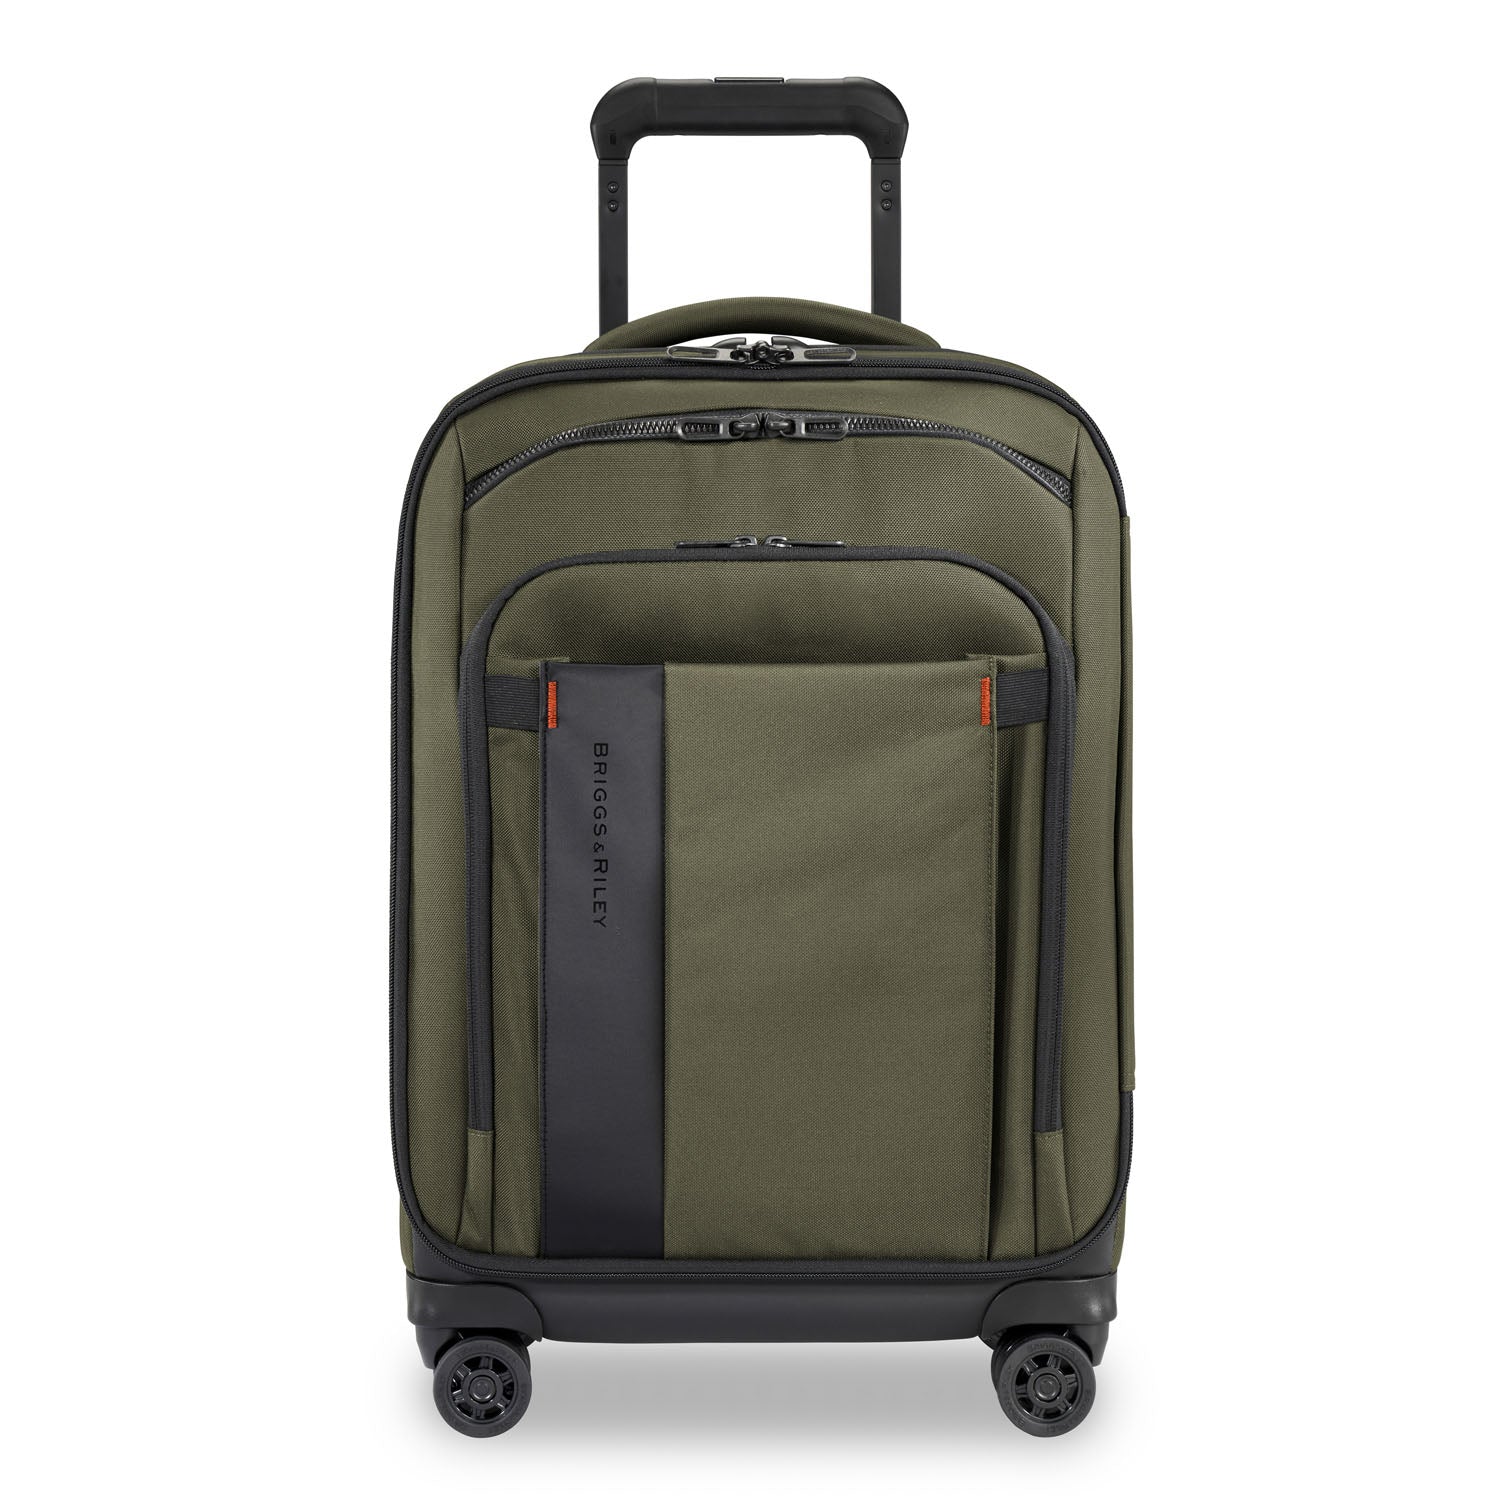 Briggs & Durable Luggage with a Lifetime Guarantee